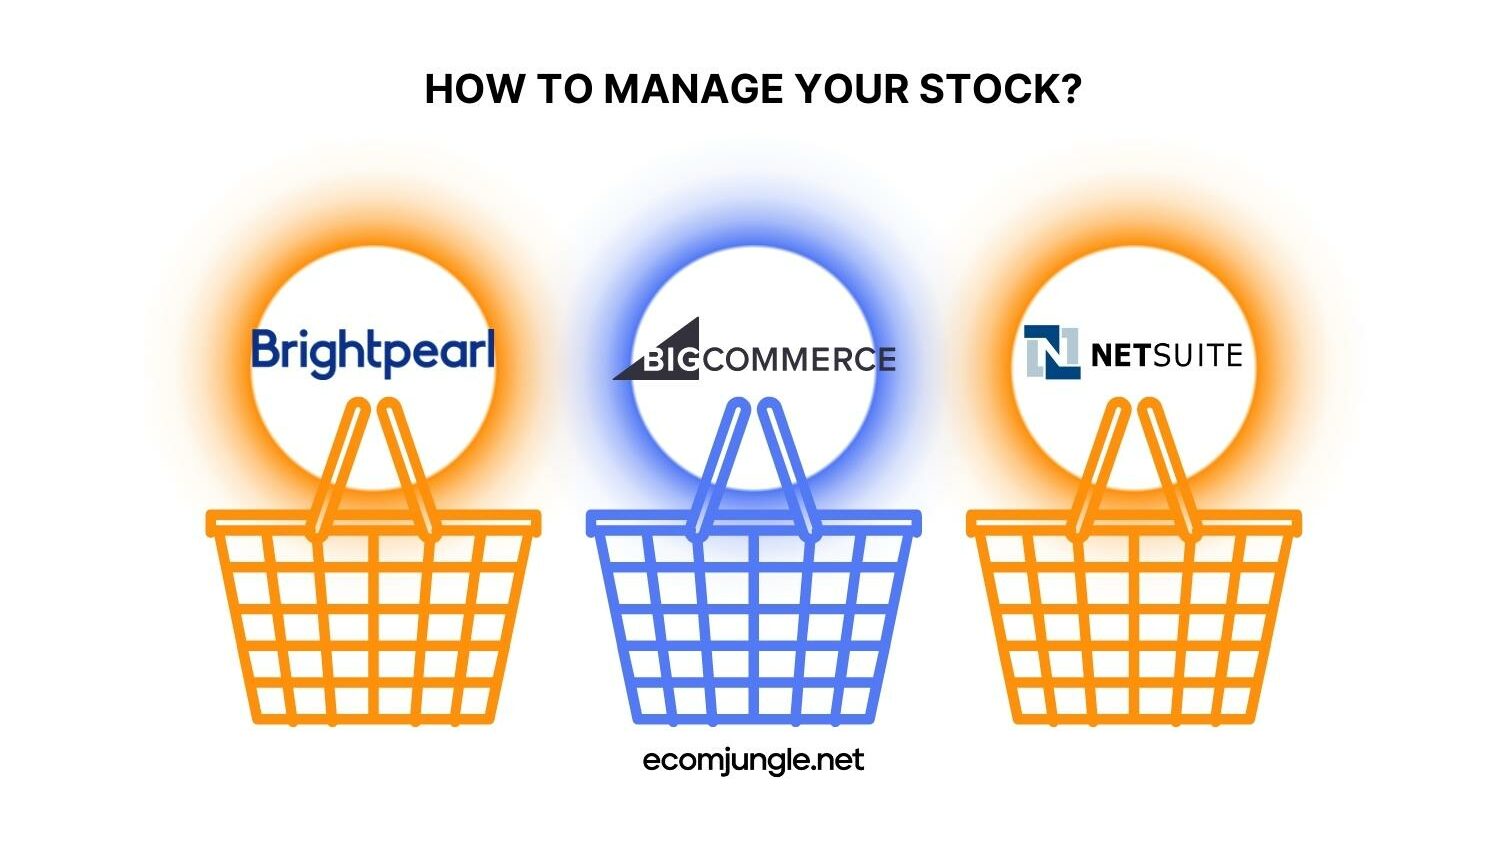 There are some ready solutions to manage your ecommerce website stock like bigcommerce.